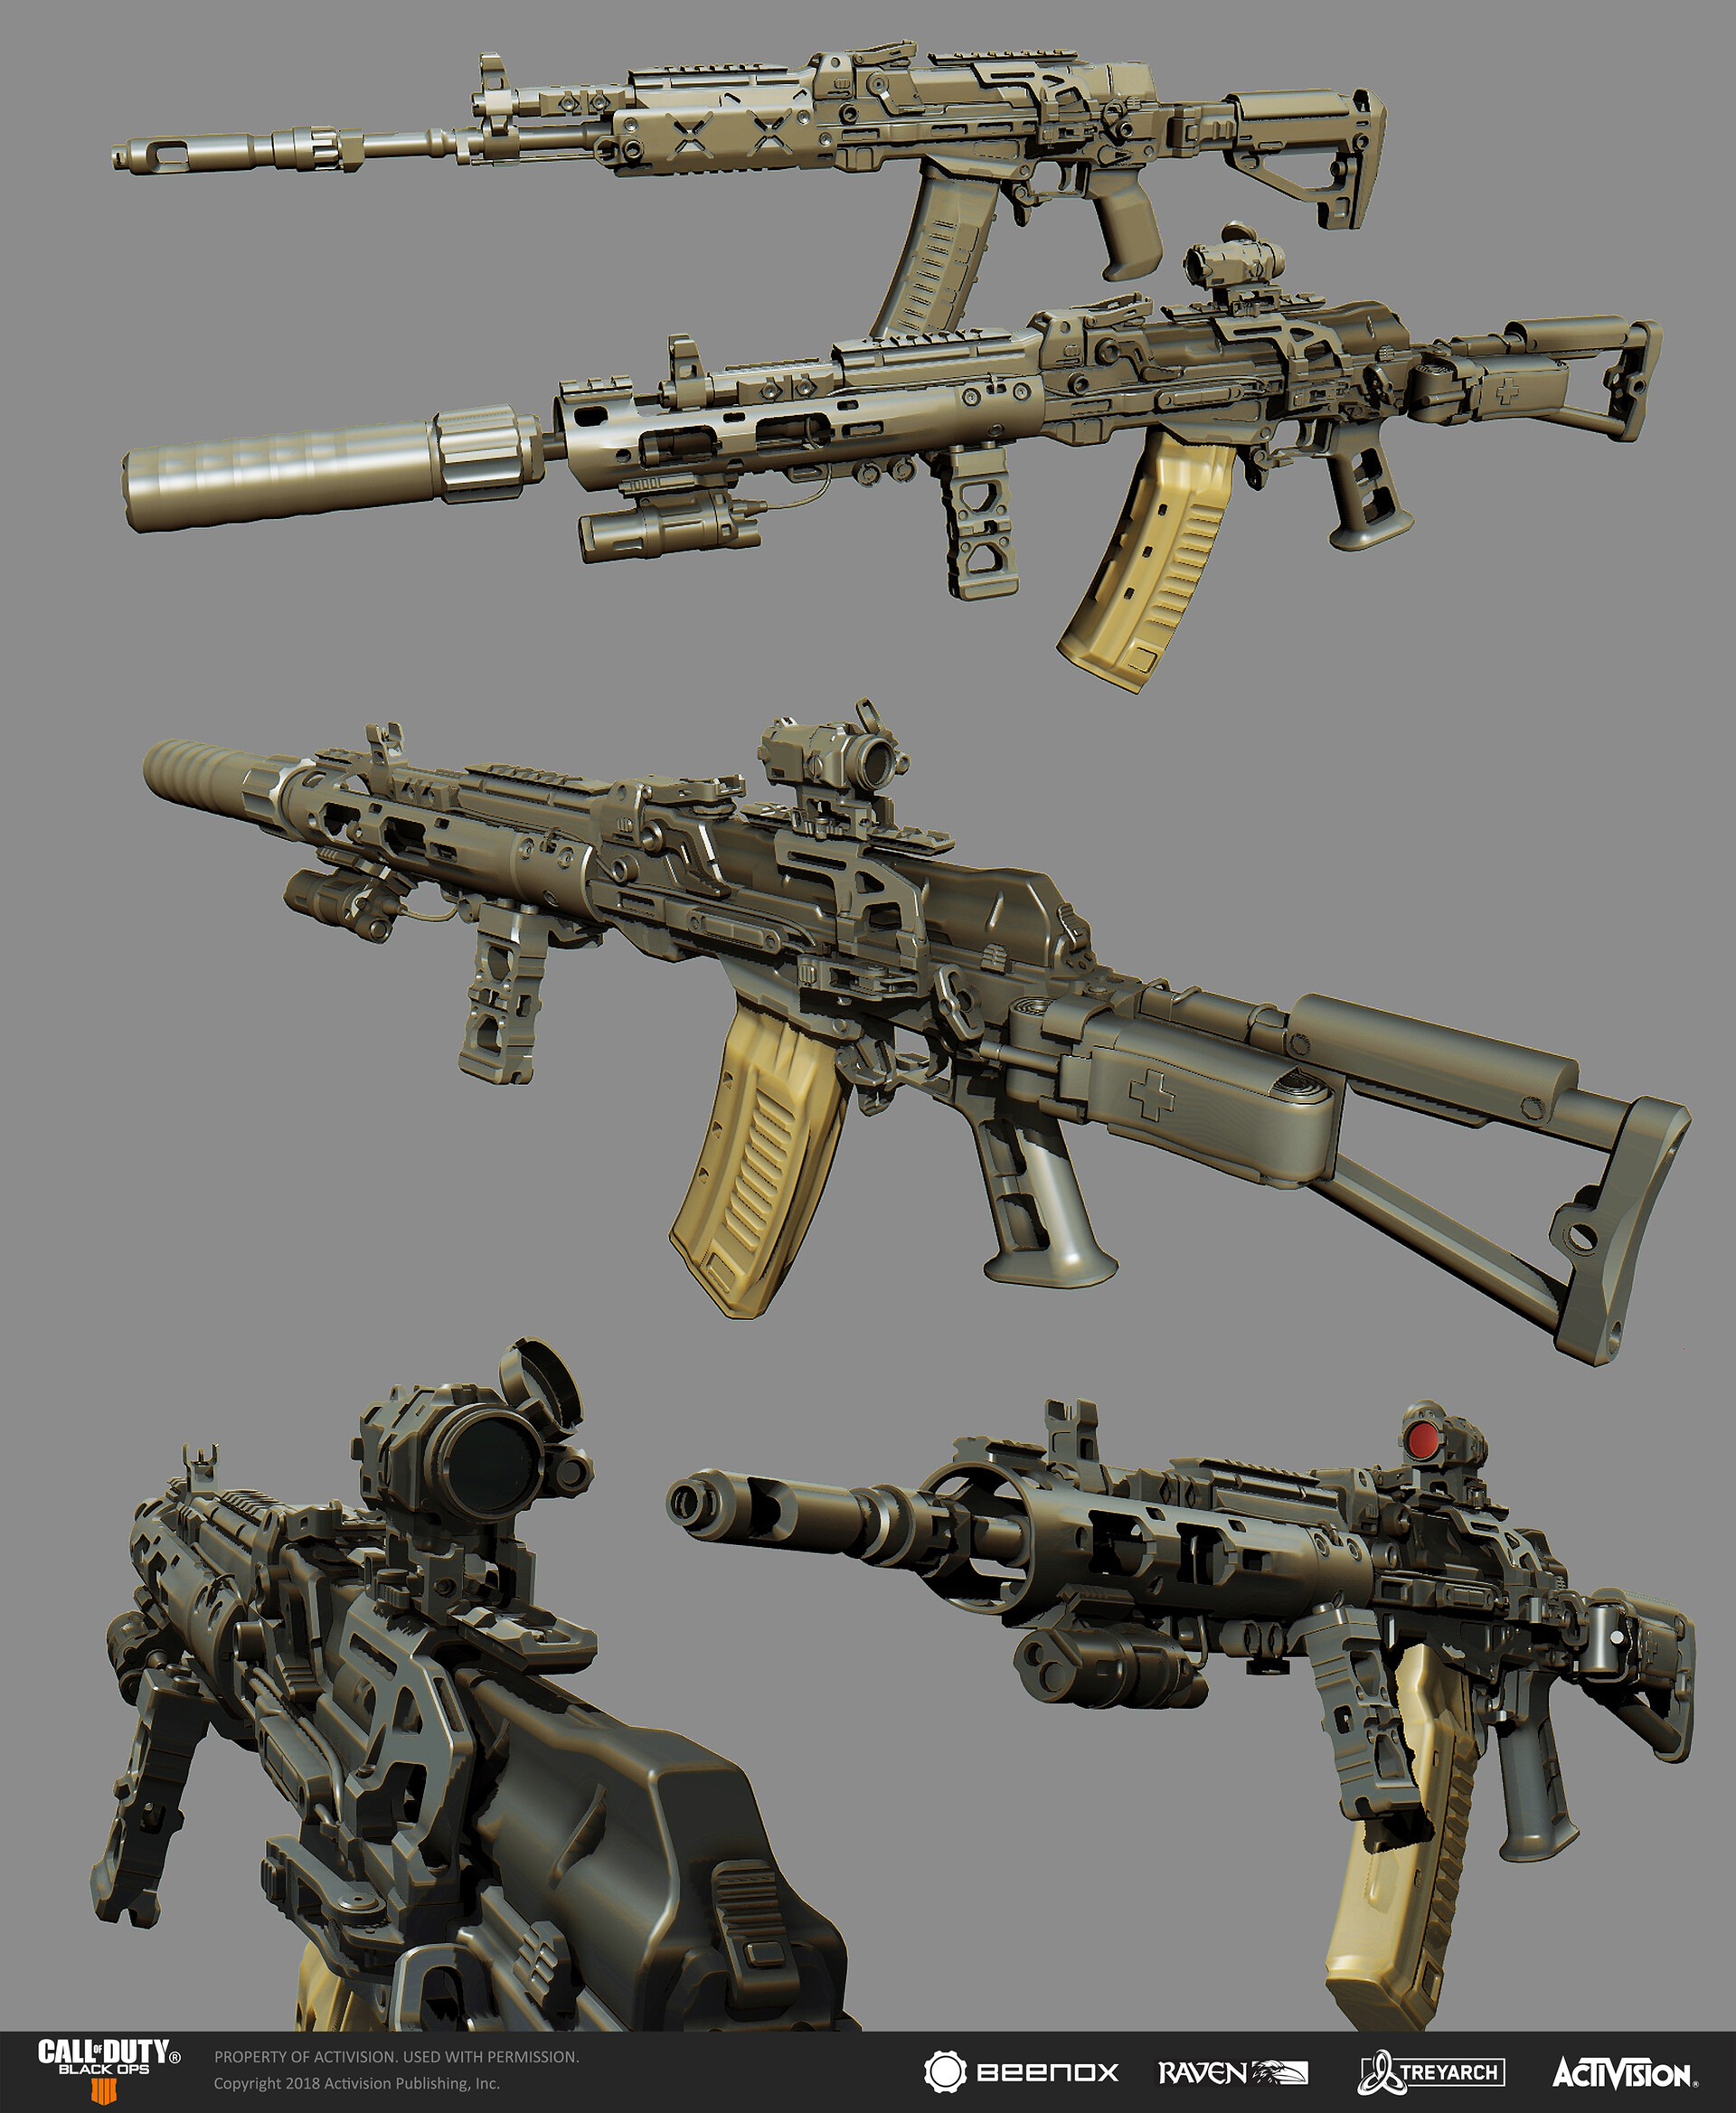 Call of Duty Black Ops 4 Weapon Concept KN-57 and full attachment kit.